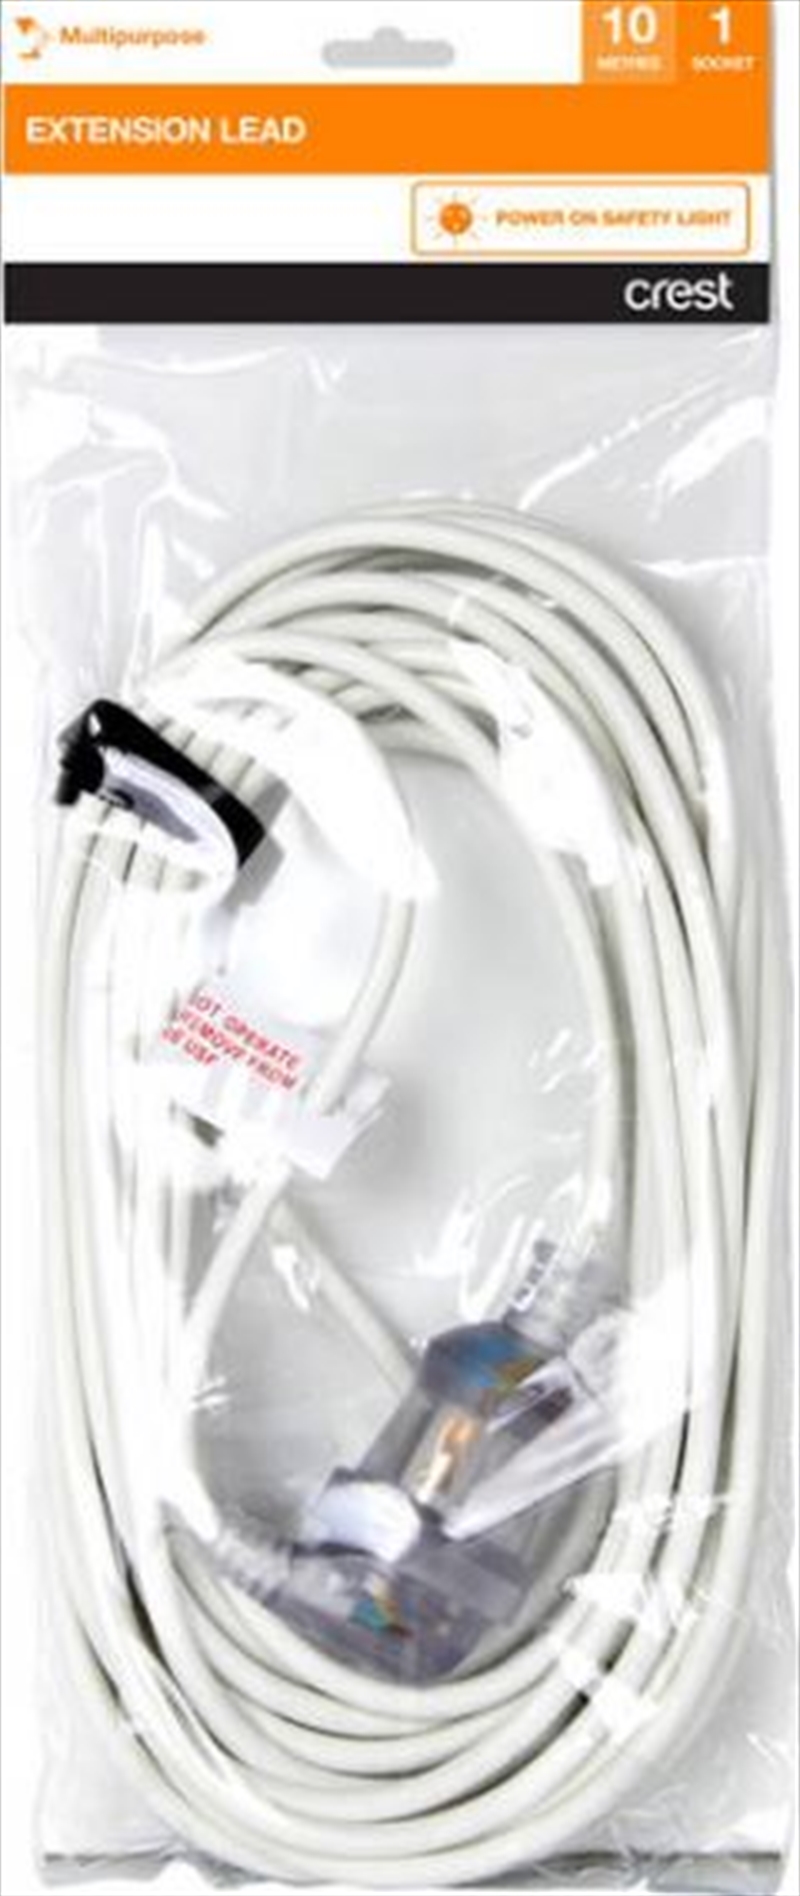 Crest Extension Lead With Built-In Light - 10M/Product Detail/Cables